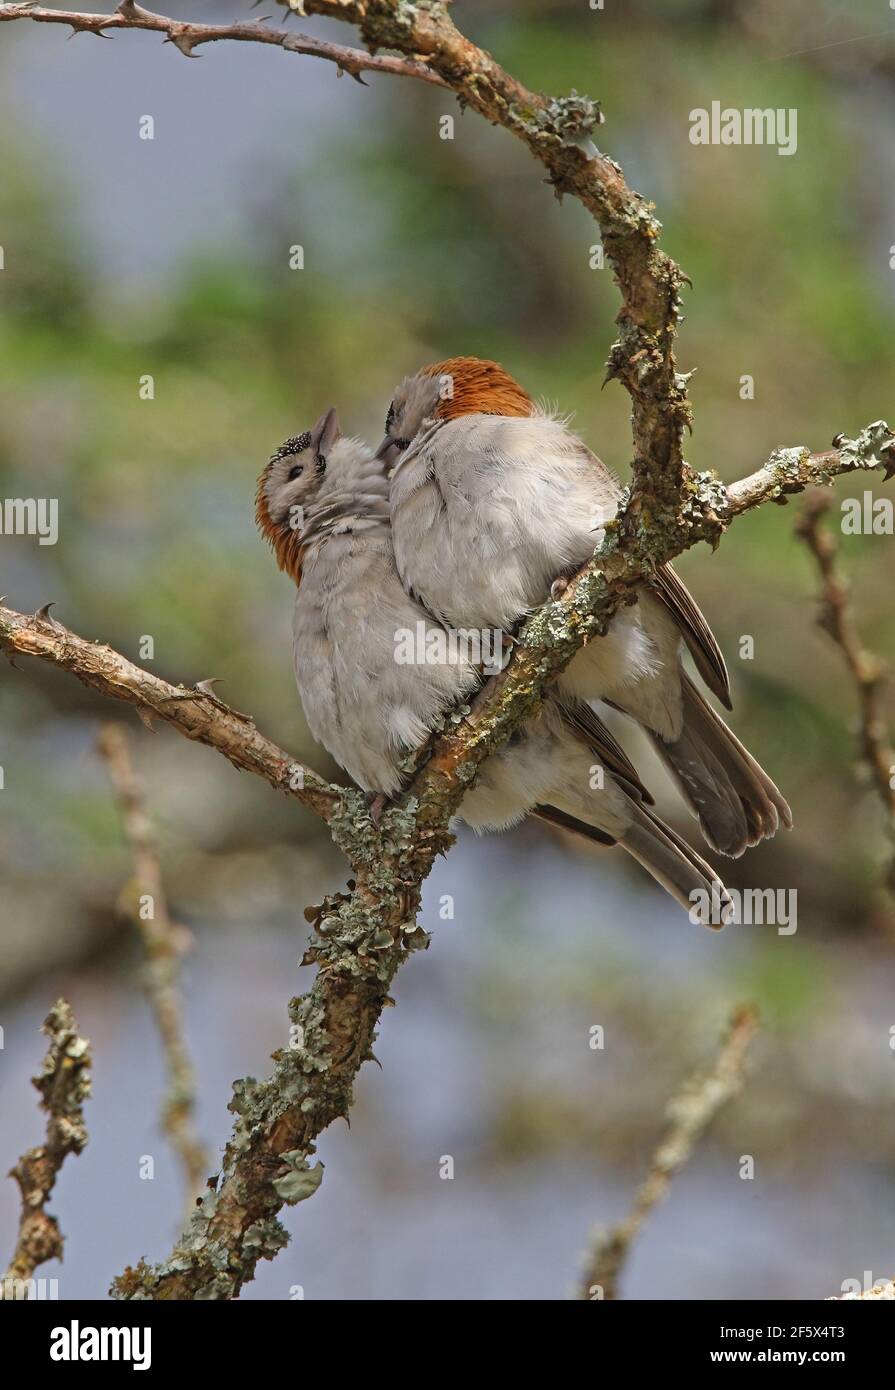 Speckle-fronted Weaver (Sporopipes frontalis emini) pair perched on branch mutual preening Kenya            November Stock Photo